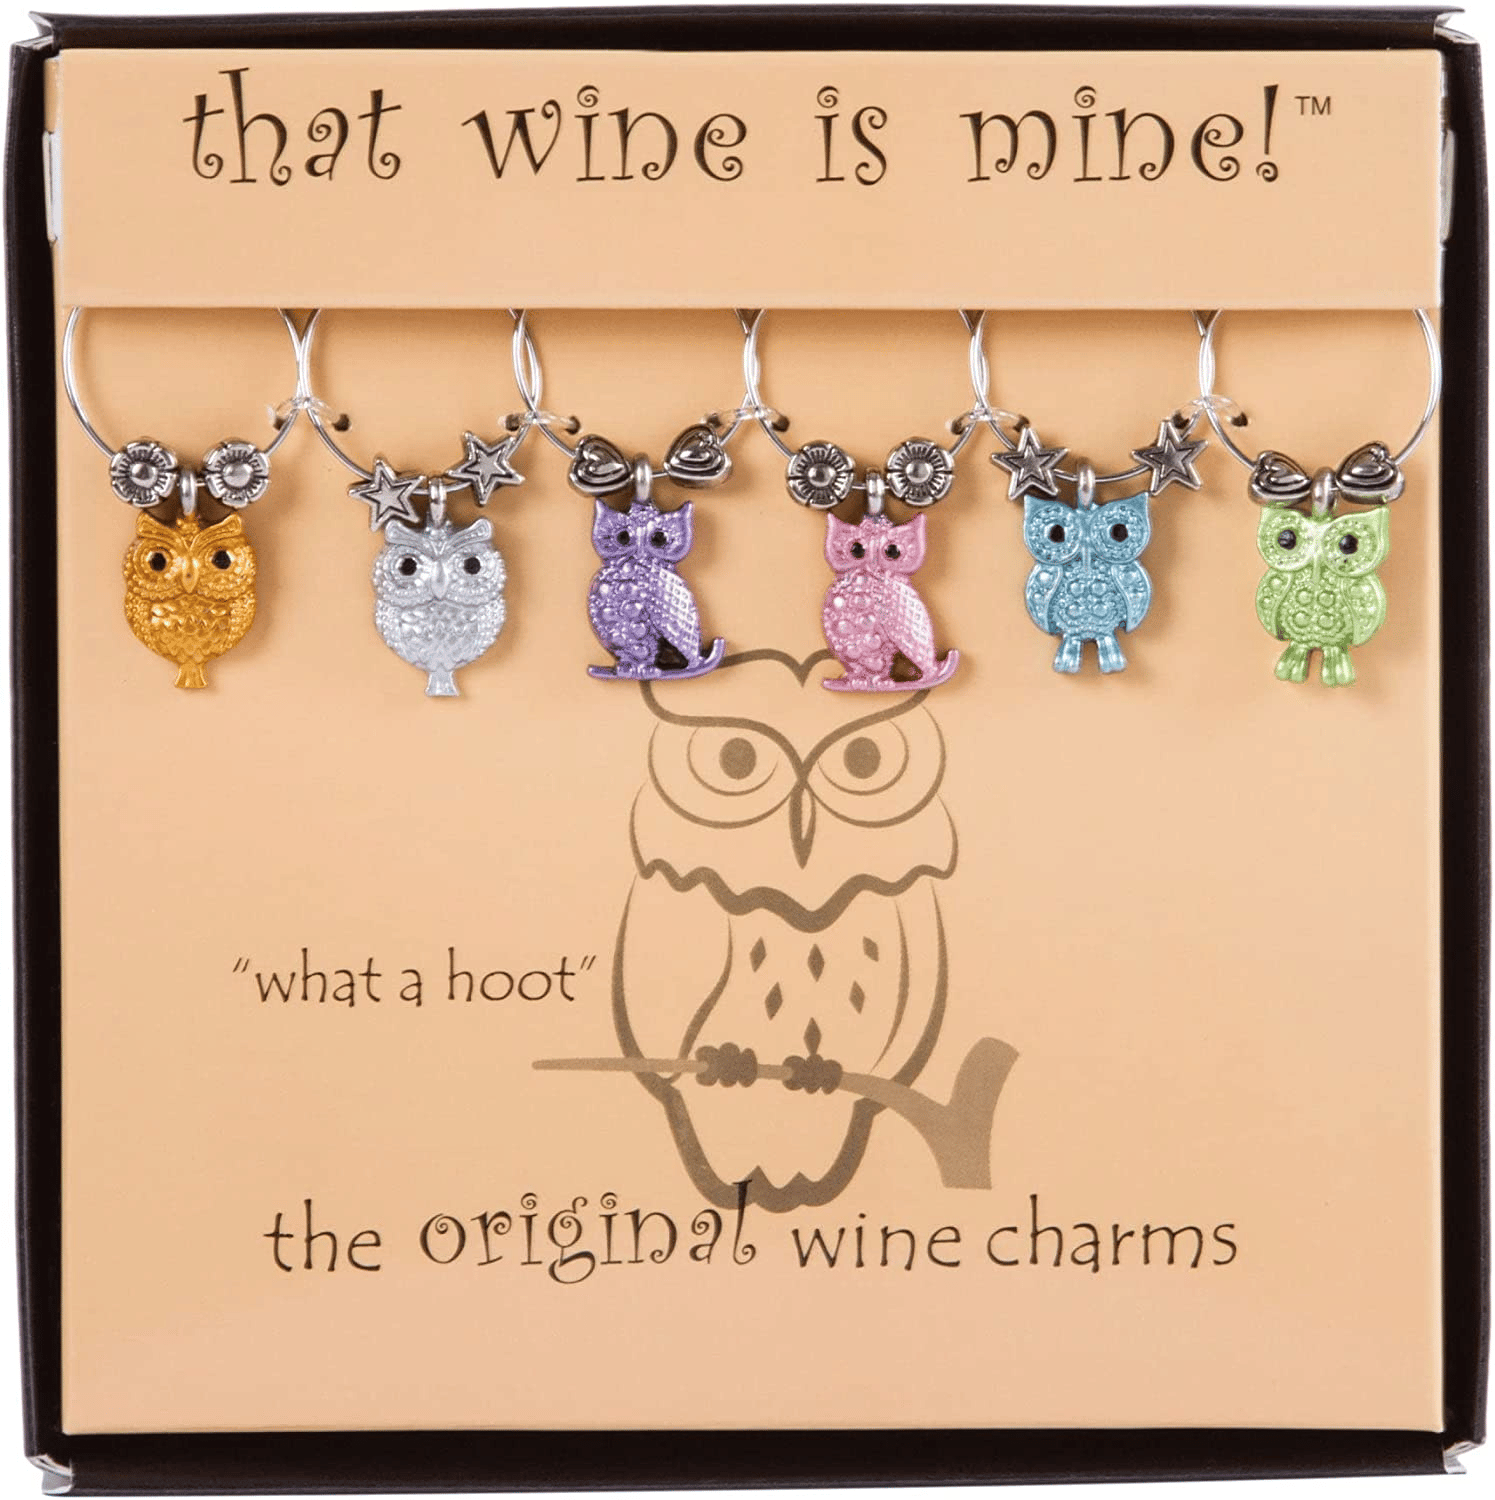 Owl-themed birthday party wine glass charms